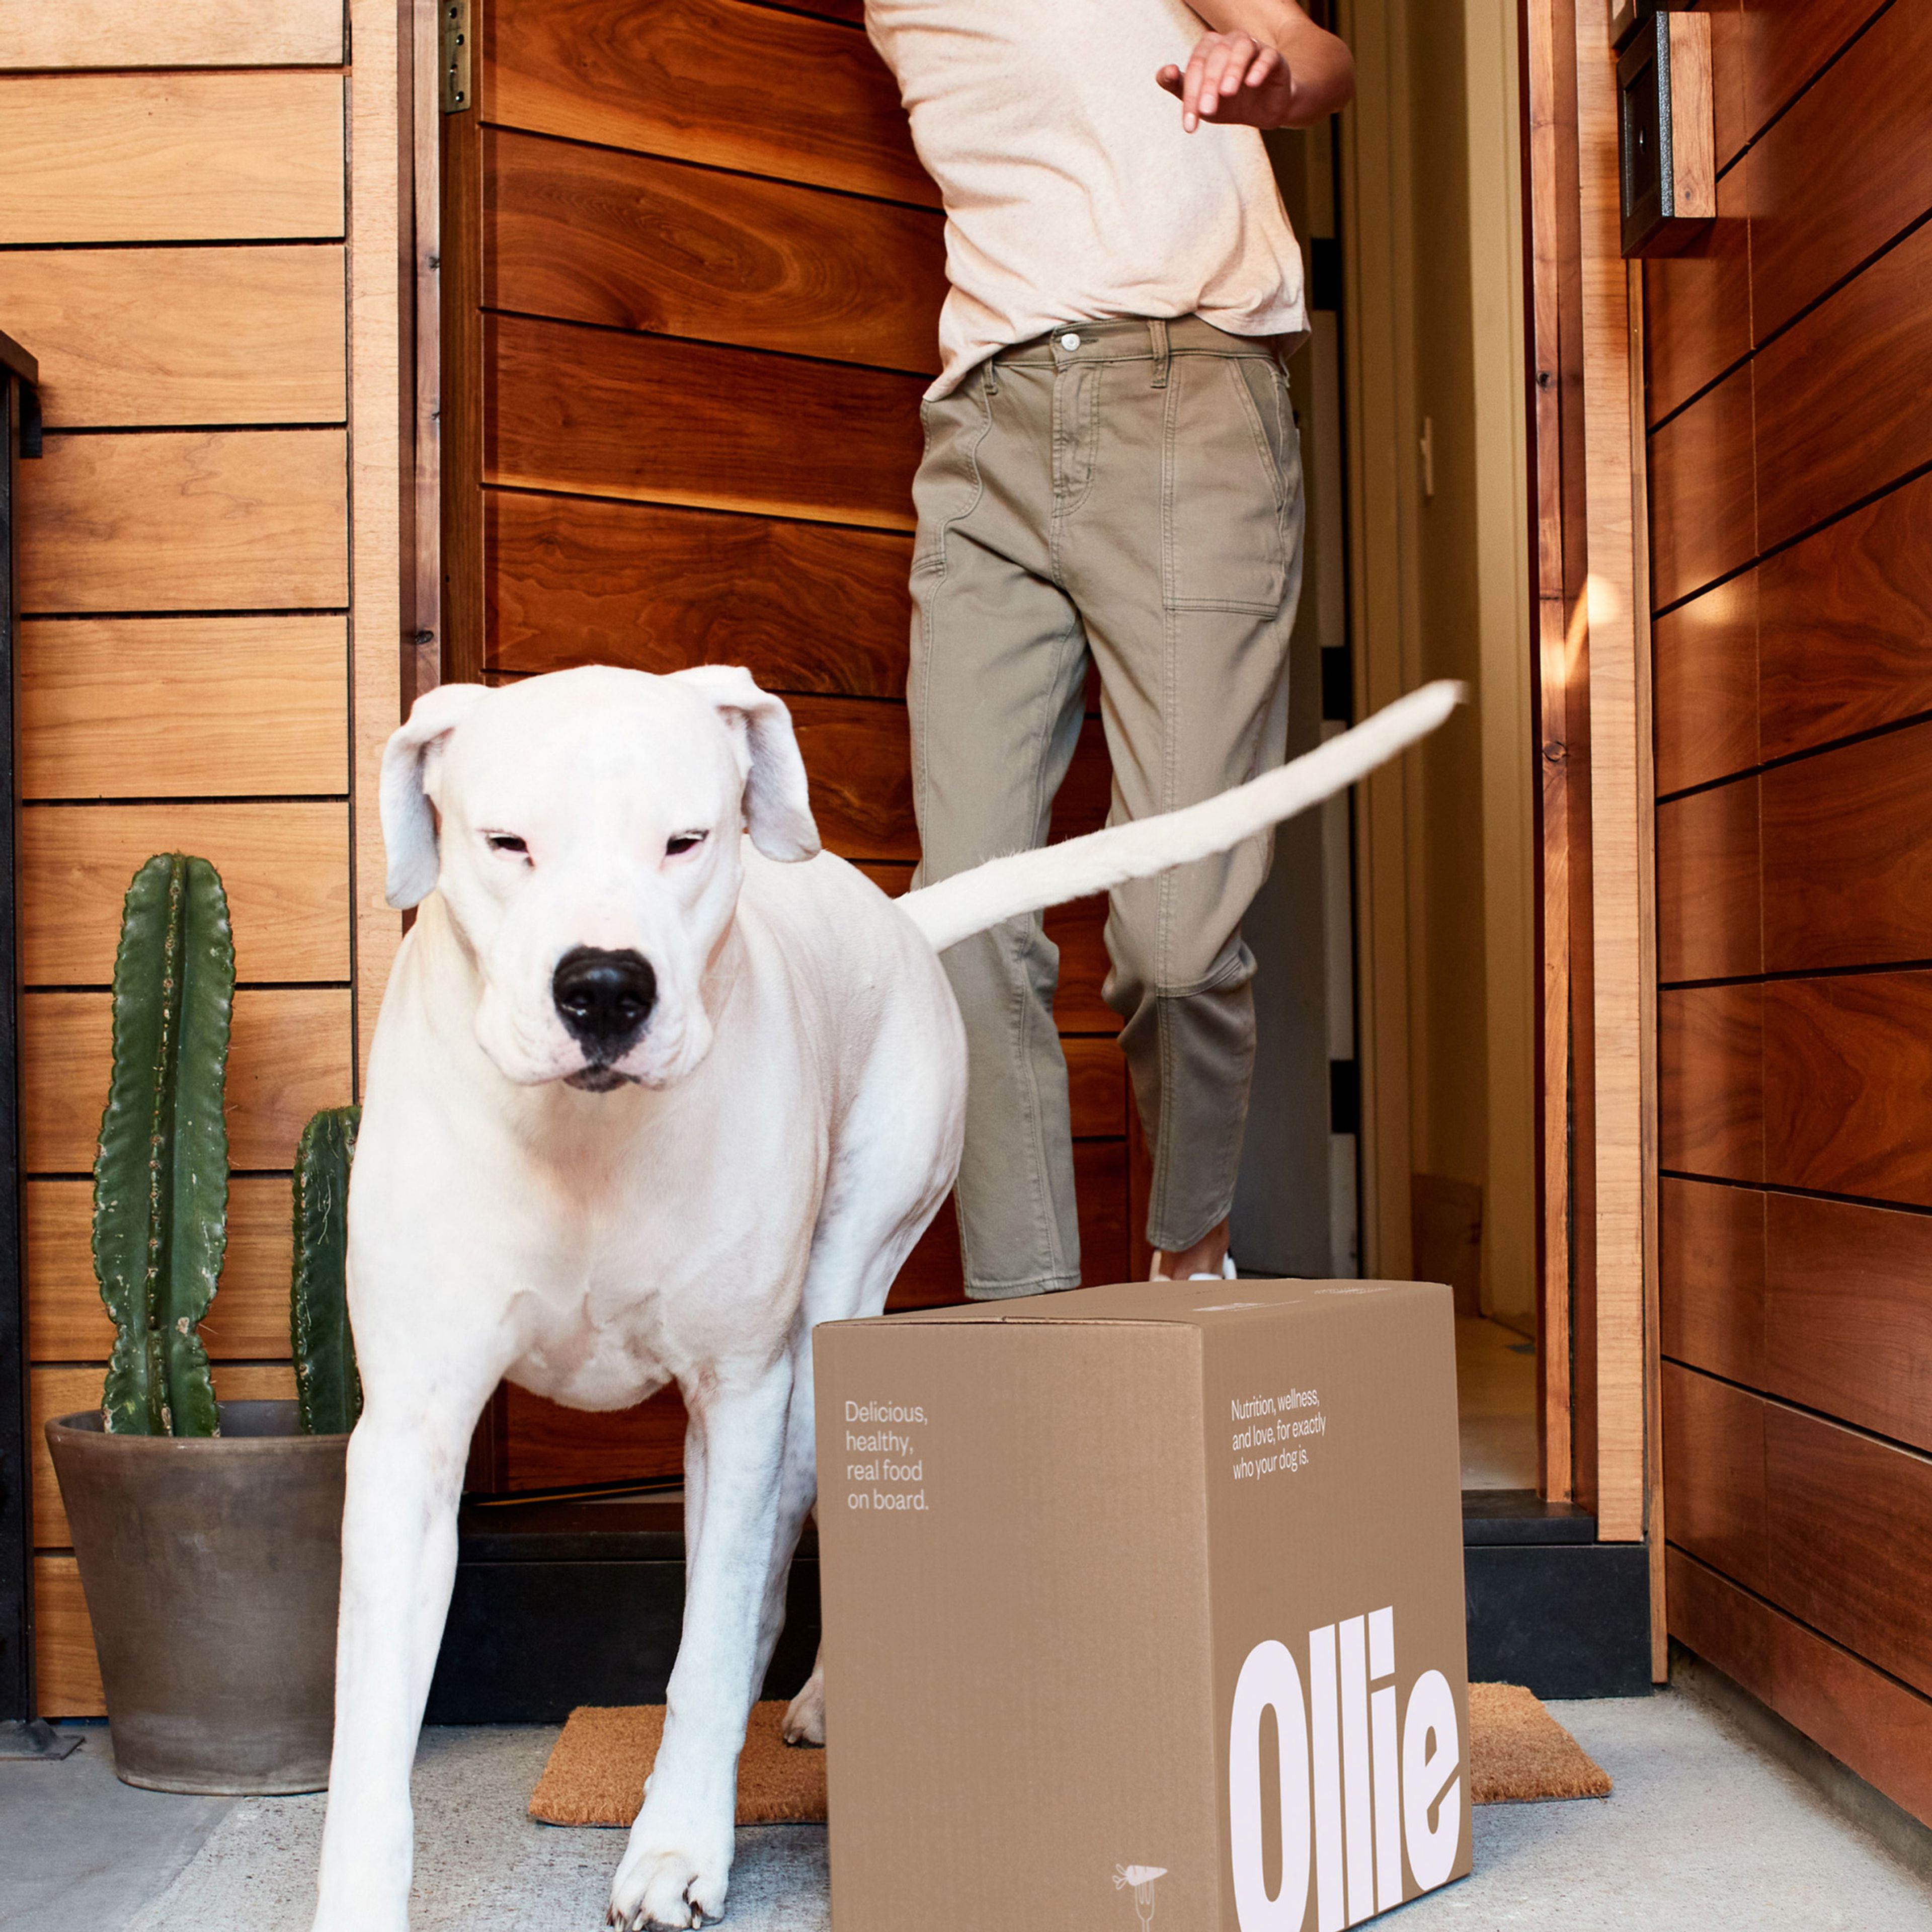 Dog with human by front door next to box of Ollie